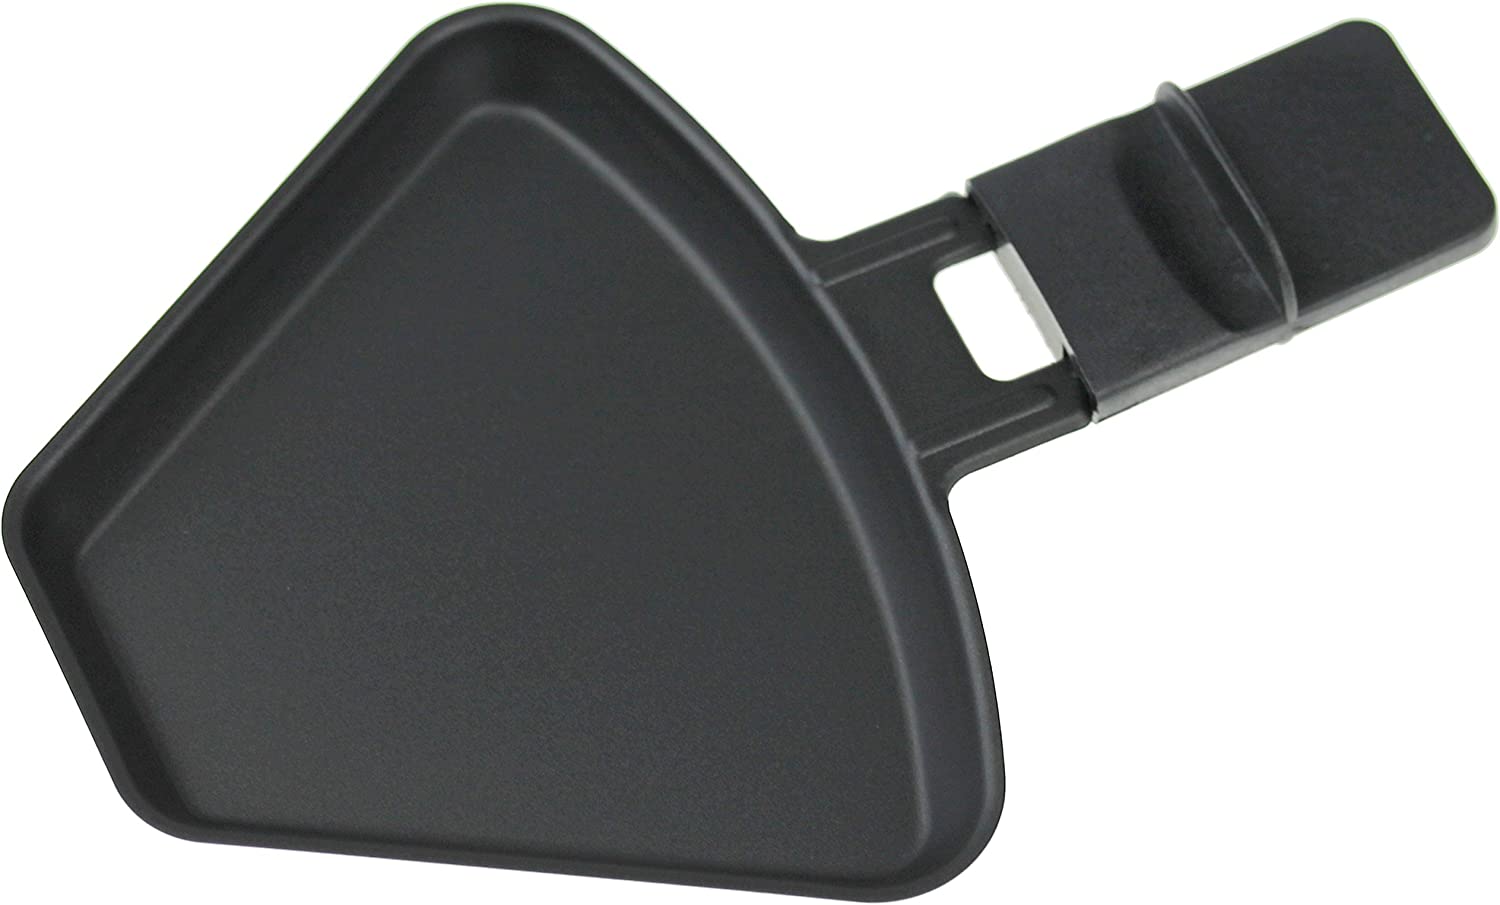 (One) Severin 0315048 Frying Pan for RG2681 Raclette